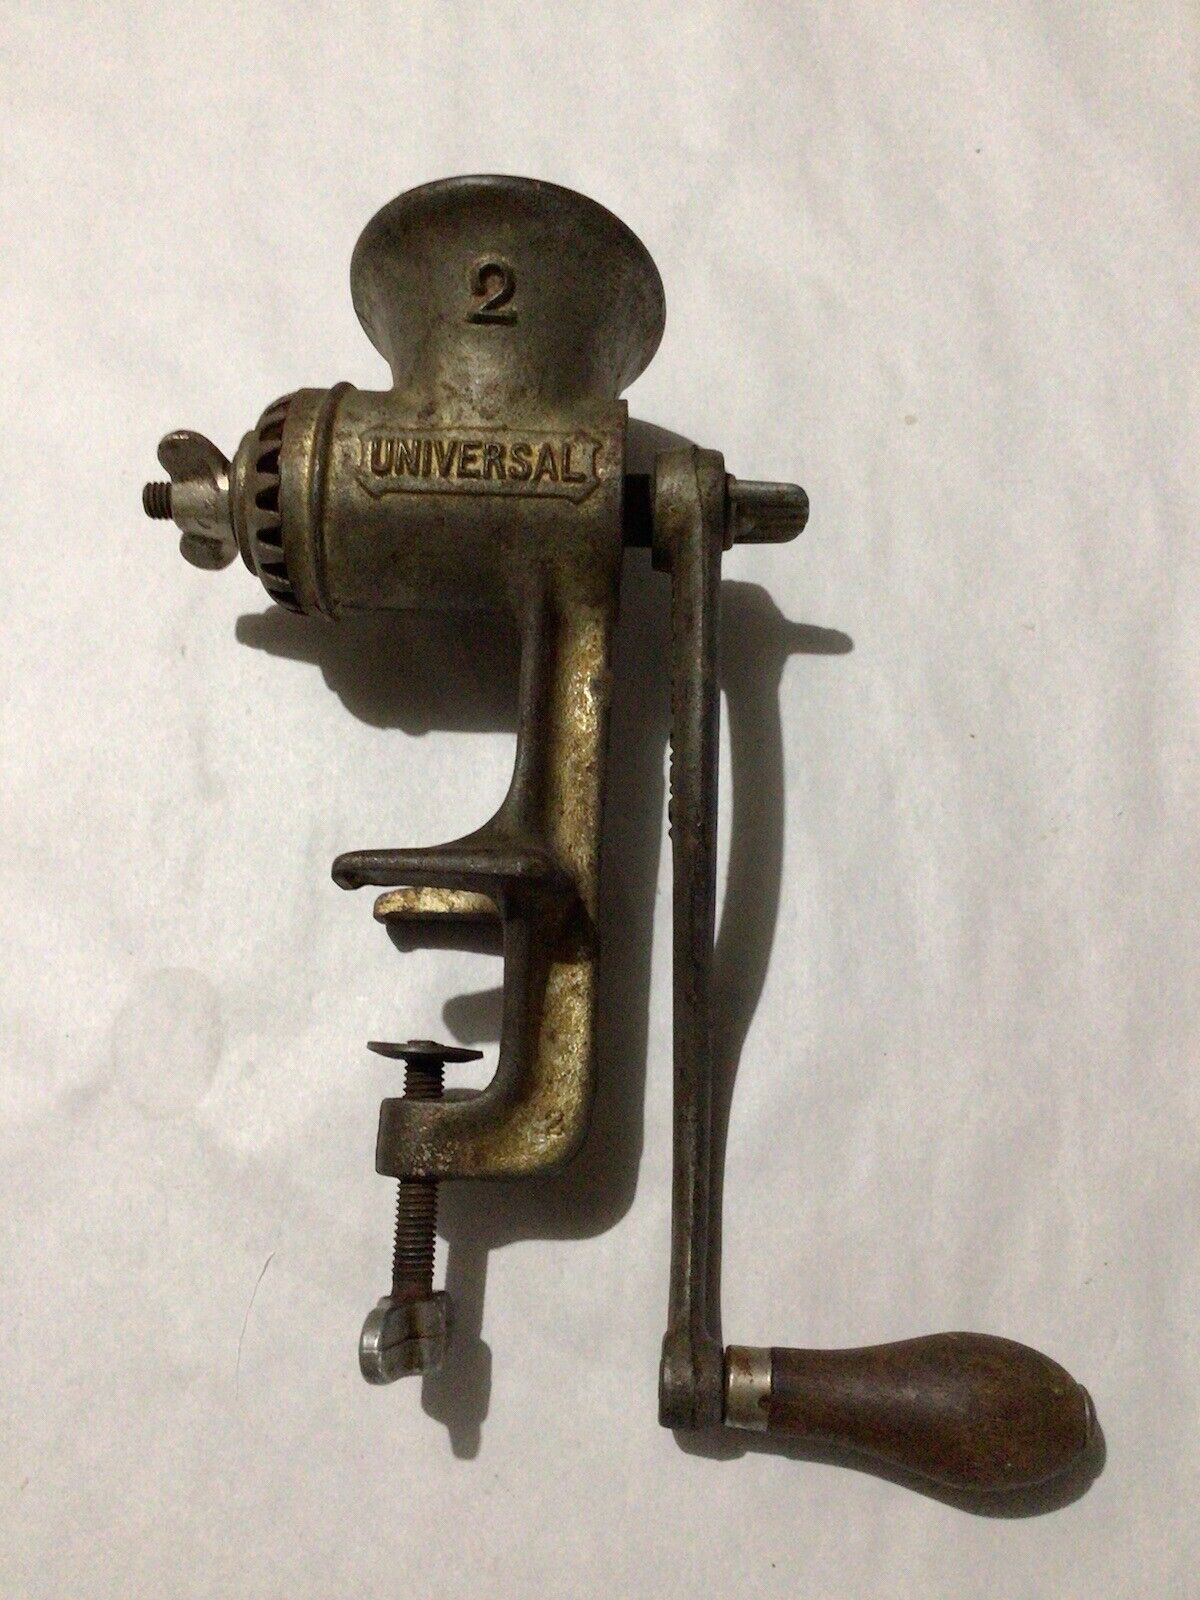 Vintage Universal No. 2 Meat Grinder & Food Chopper Previously Owned 